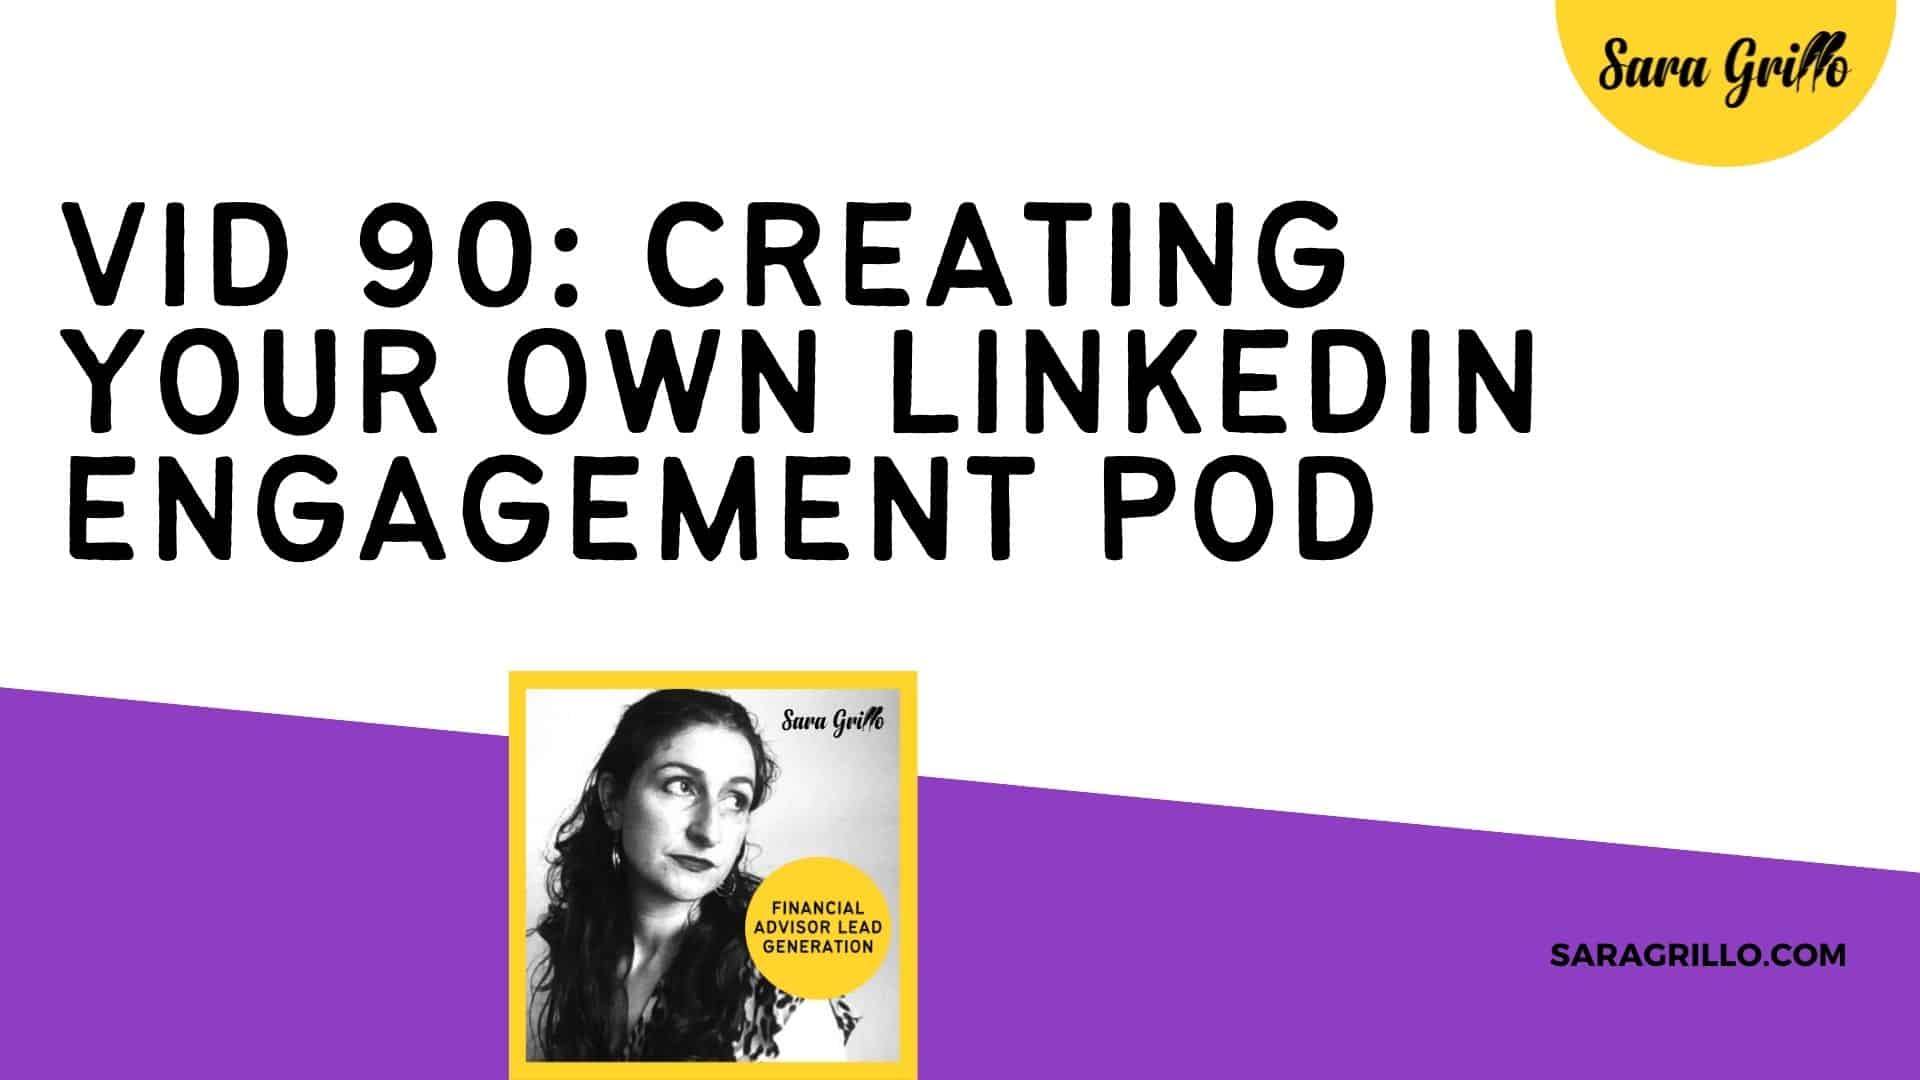 In this blog and video we talk about how to create a LinkedIn engagement pod.